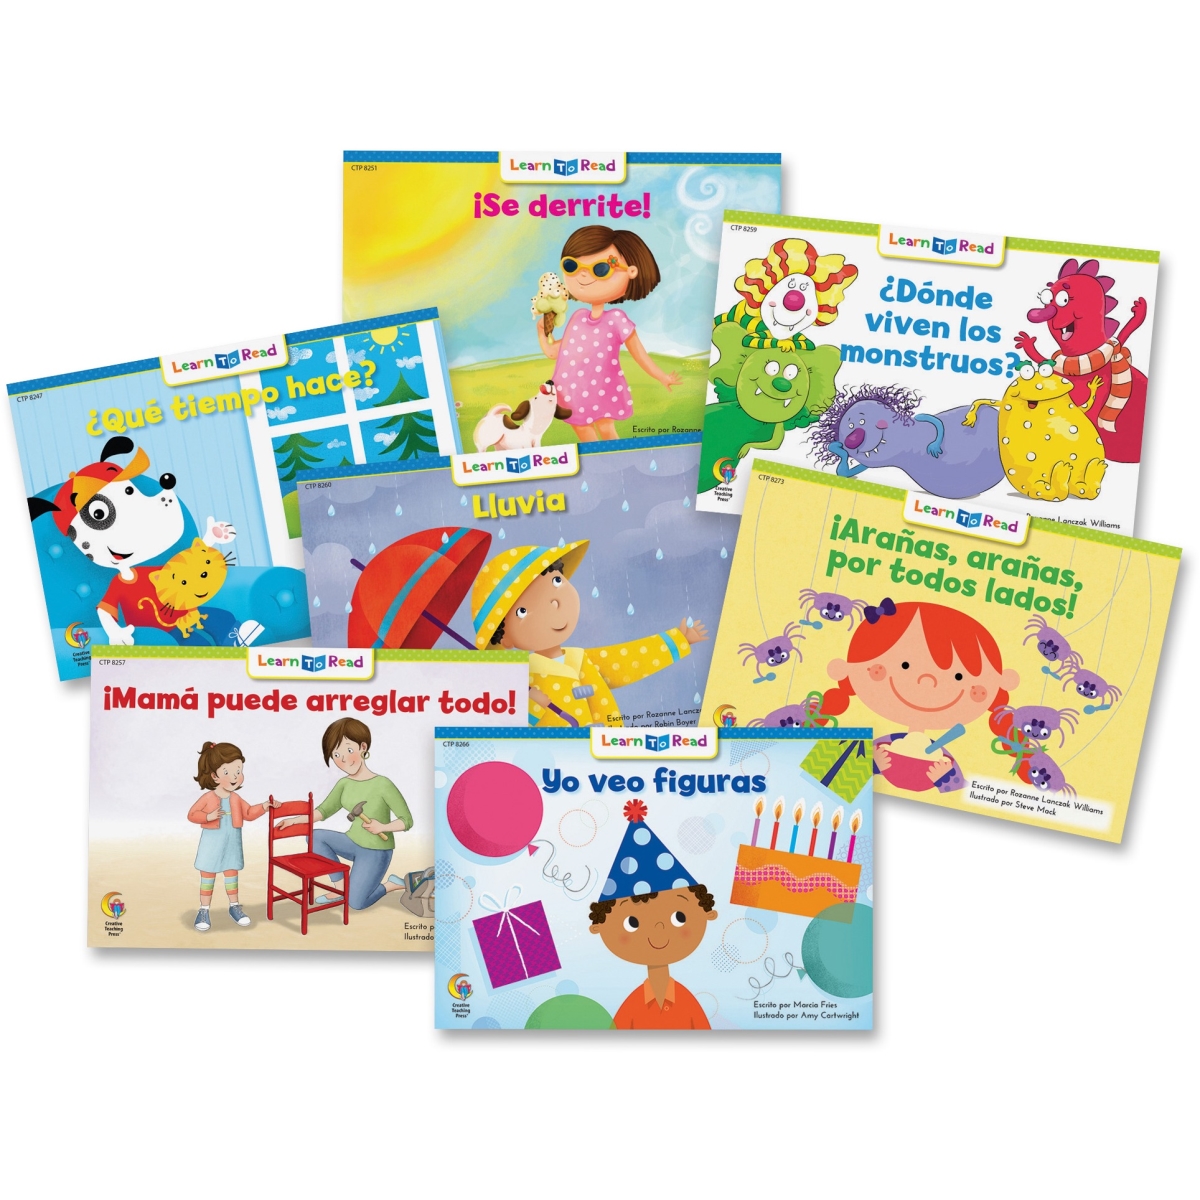 Ctc8241 Learn To Read Spanish Book Education Printed & Electronic Book - Spanish, Multi Color